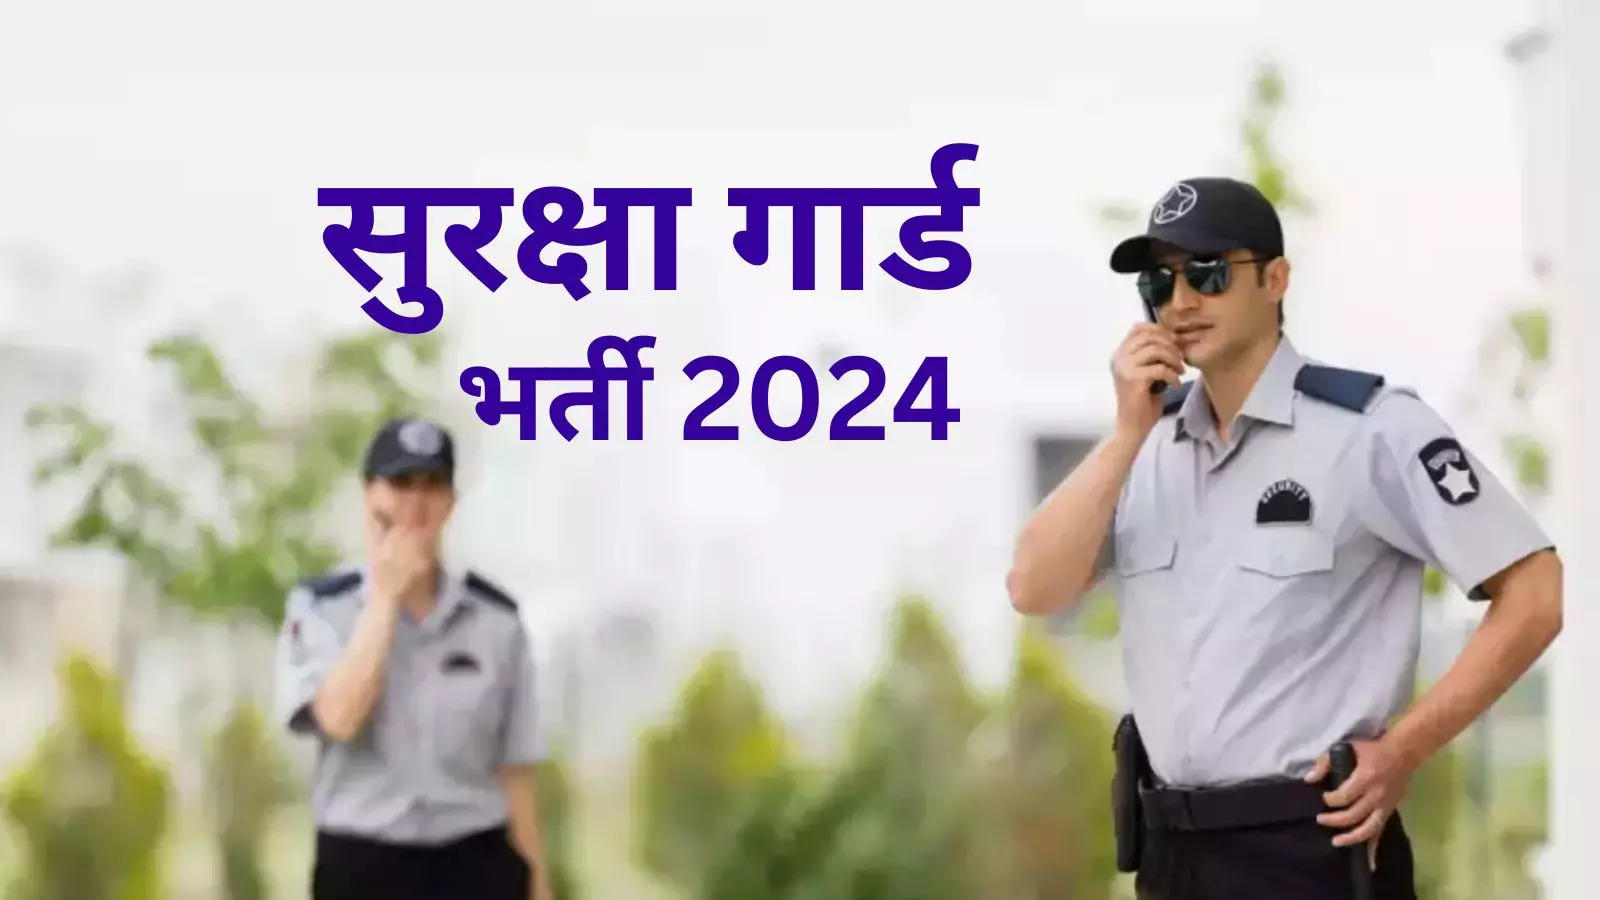 Security Guard Vacancy 2024: Security guard jobs for 10th pass, great salary, see district wise recruitment details